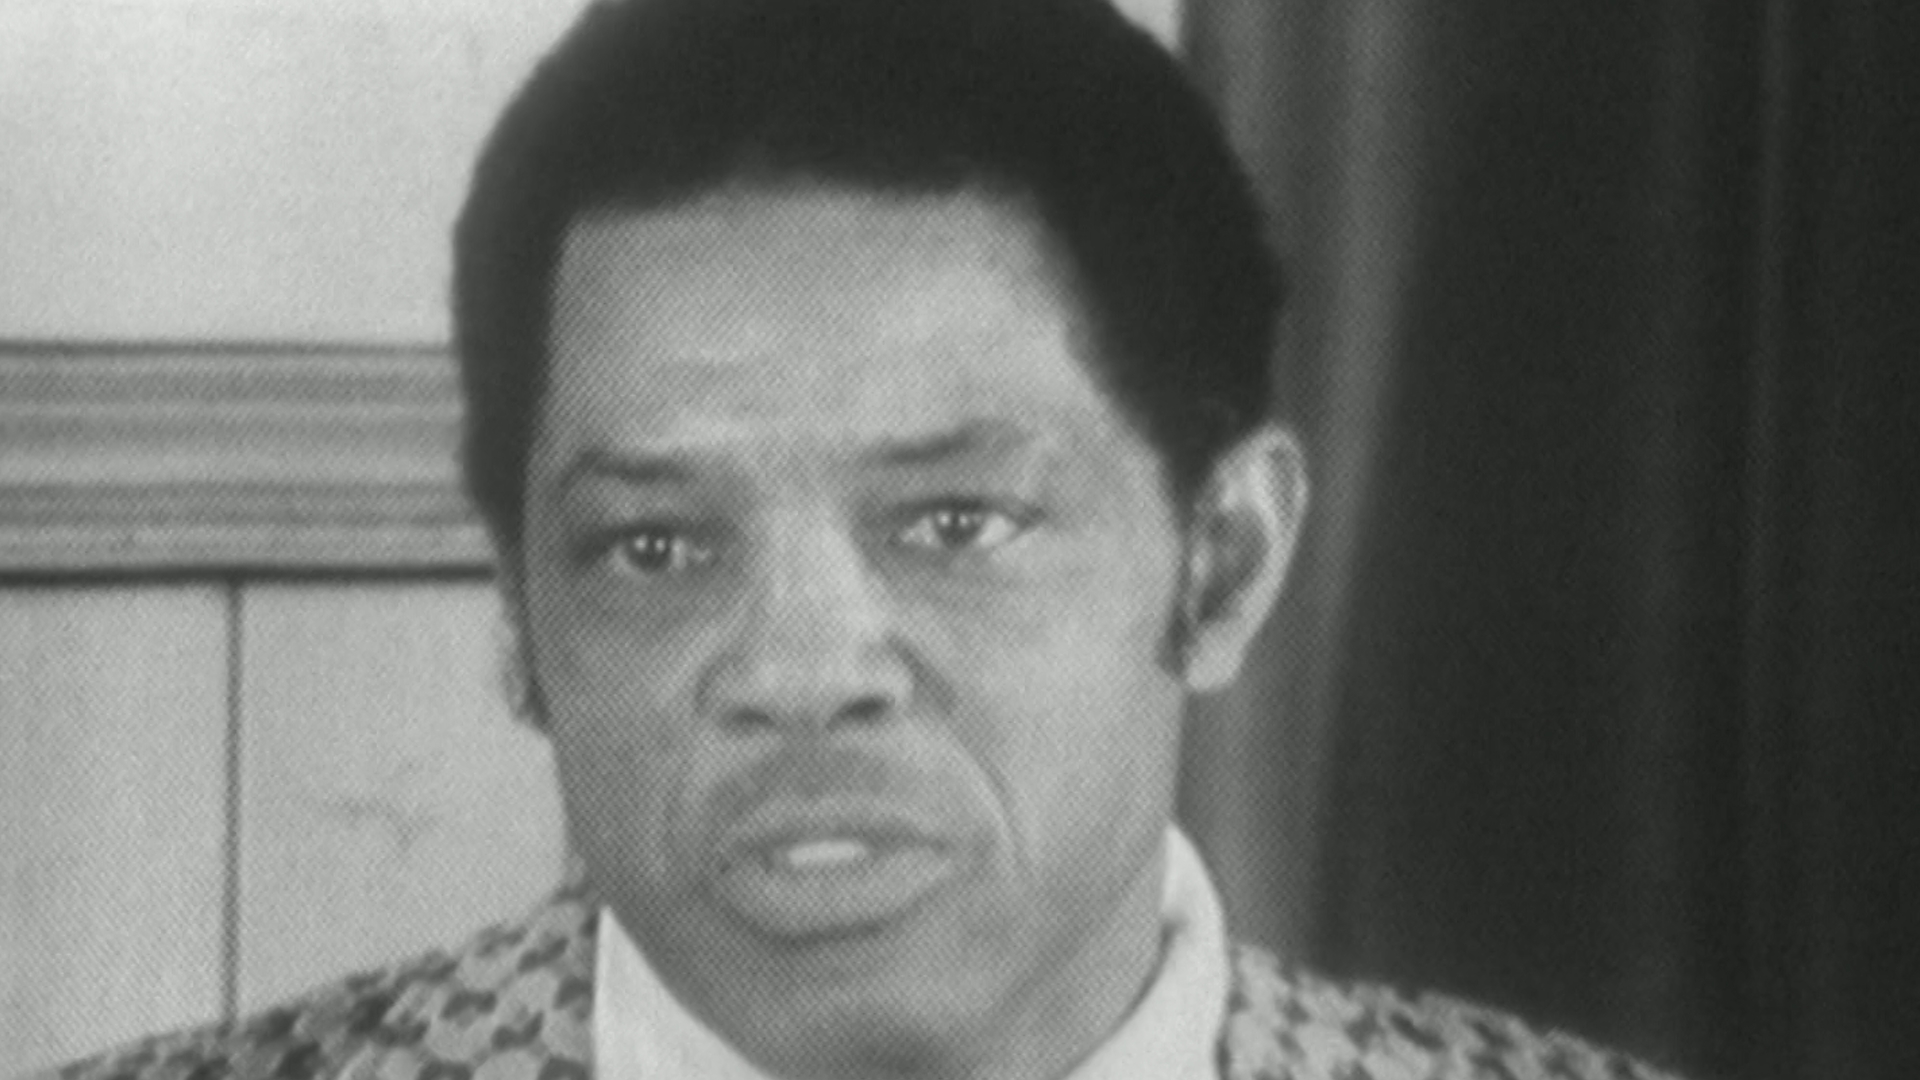 On Sept. 20, 1973, Willie Mays spoke to the media about his decision to retire from baseball.